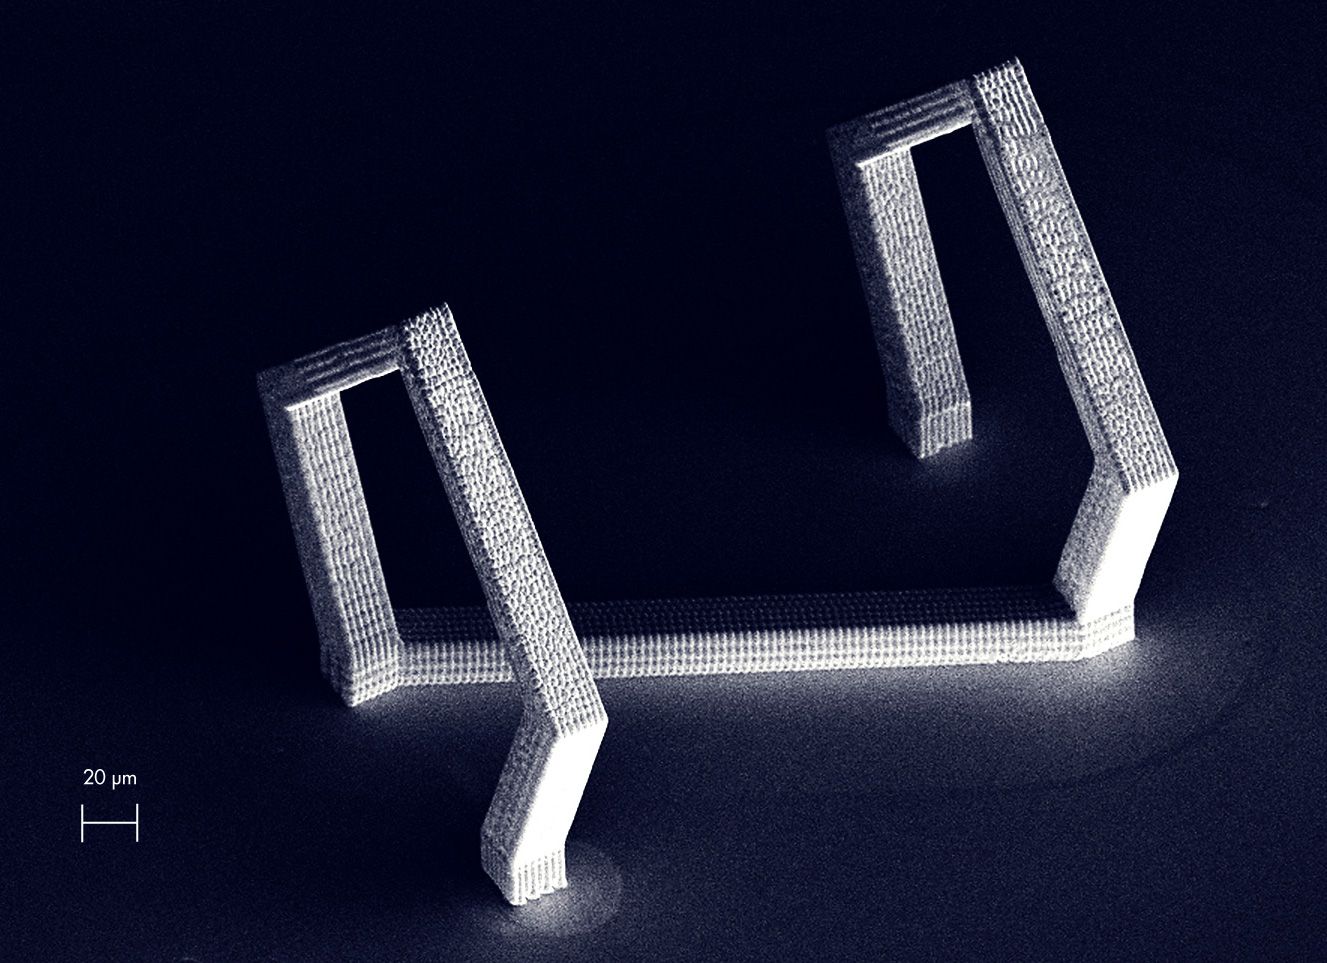 A microscale 3D printed Traveling Wave Tube (TWT) for high frequency technologies